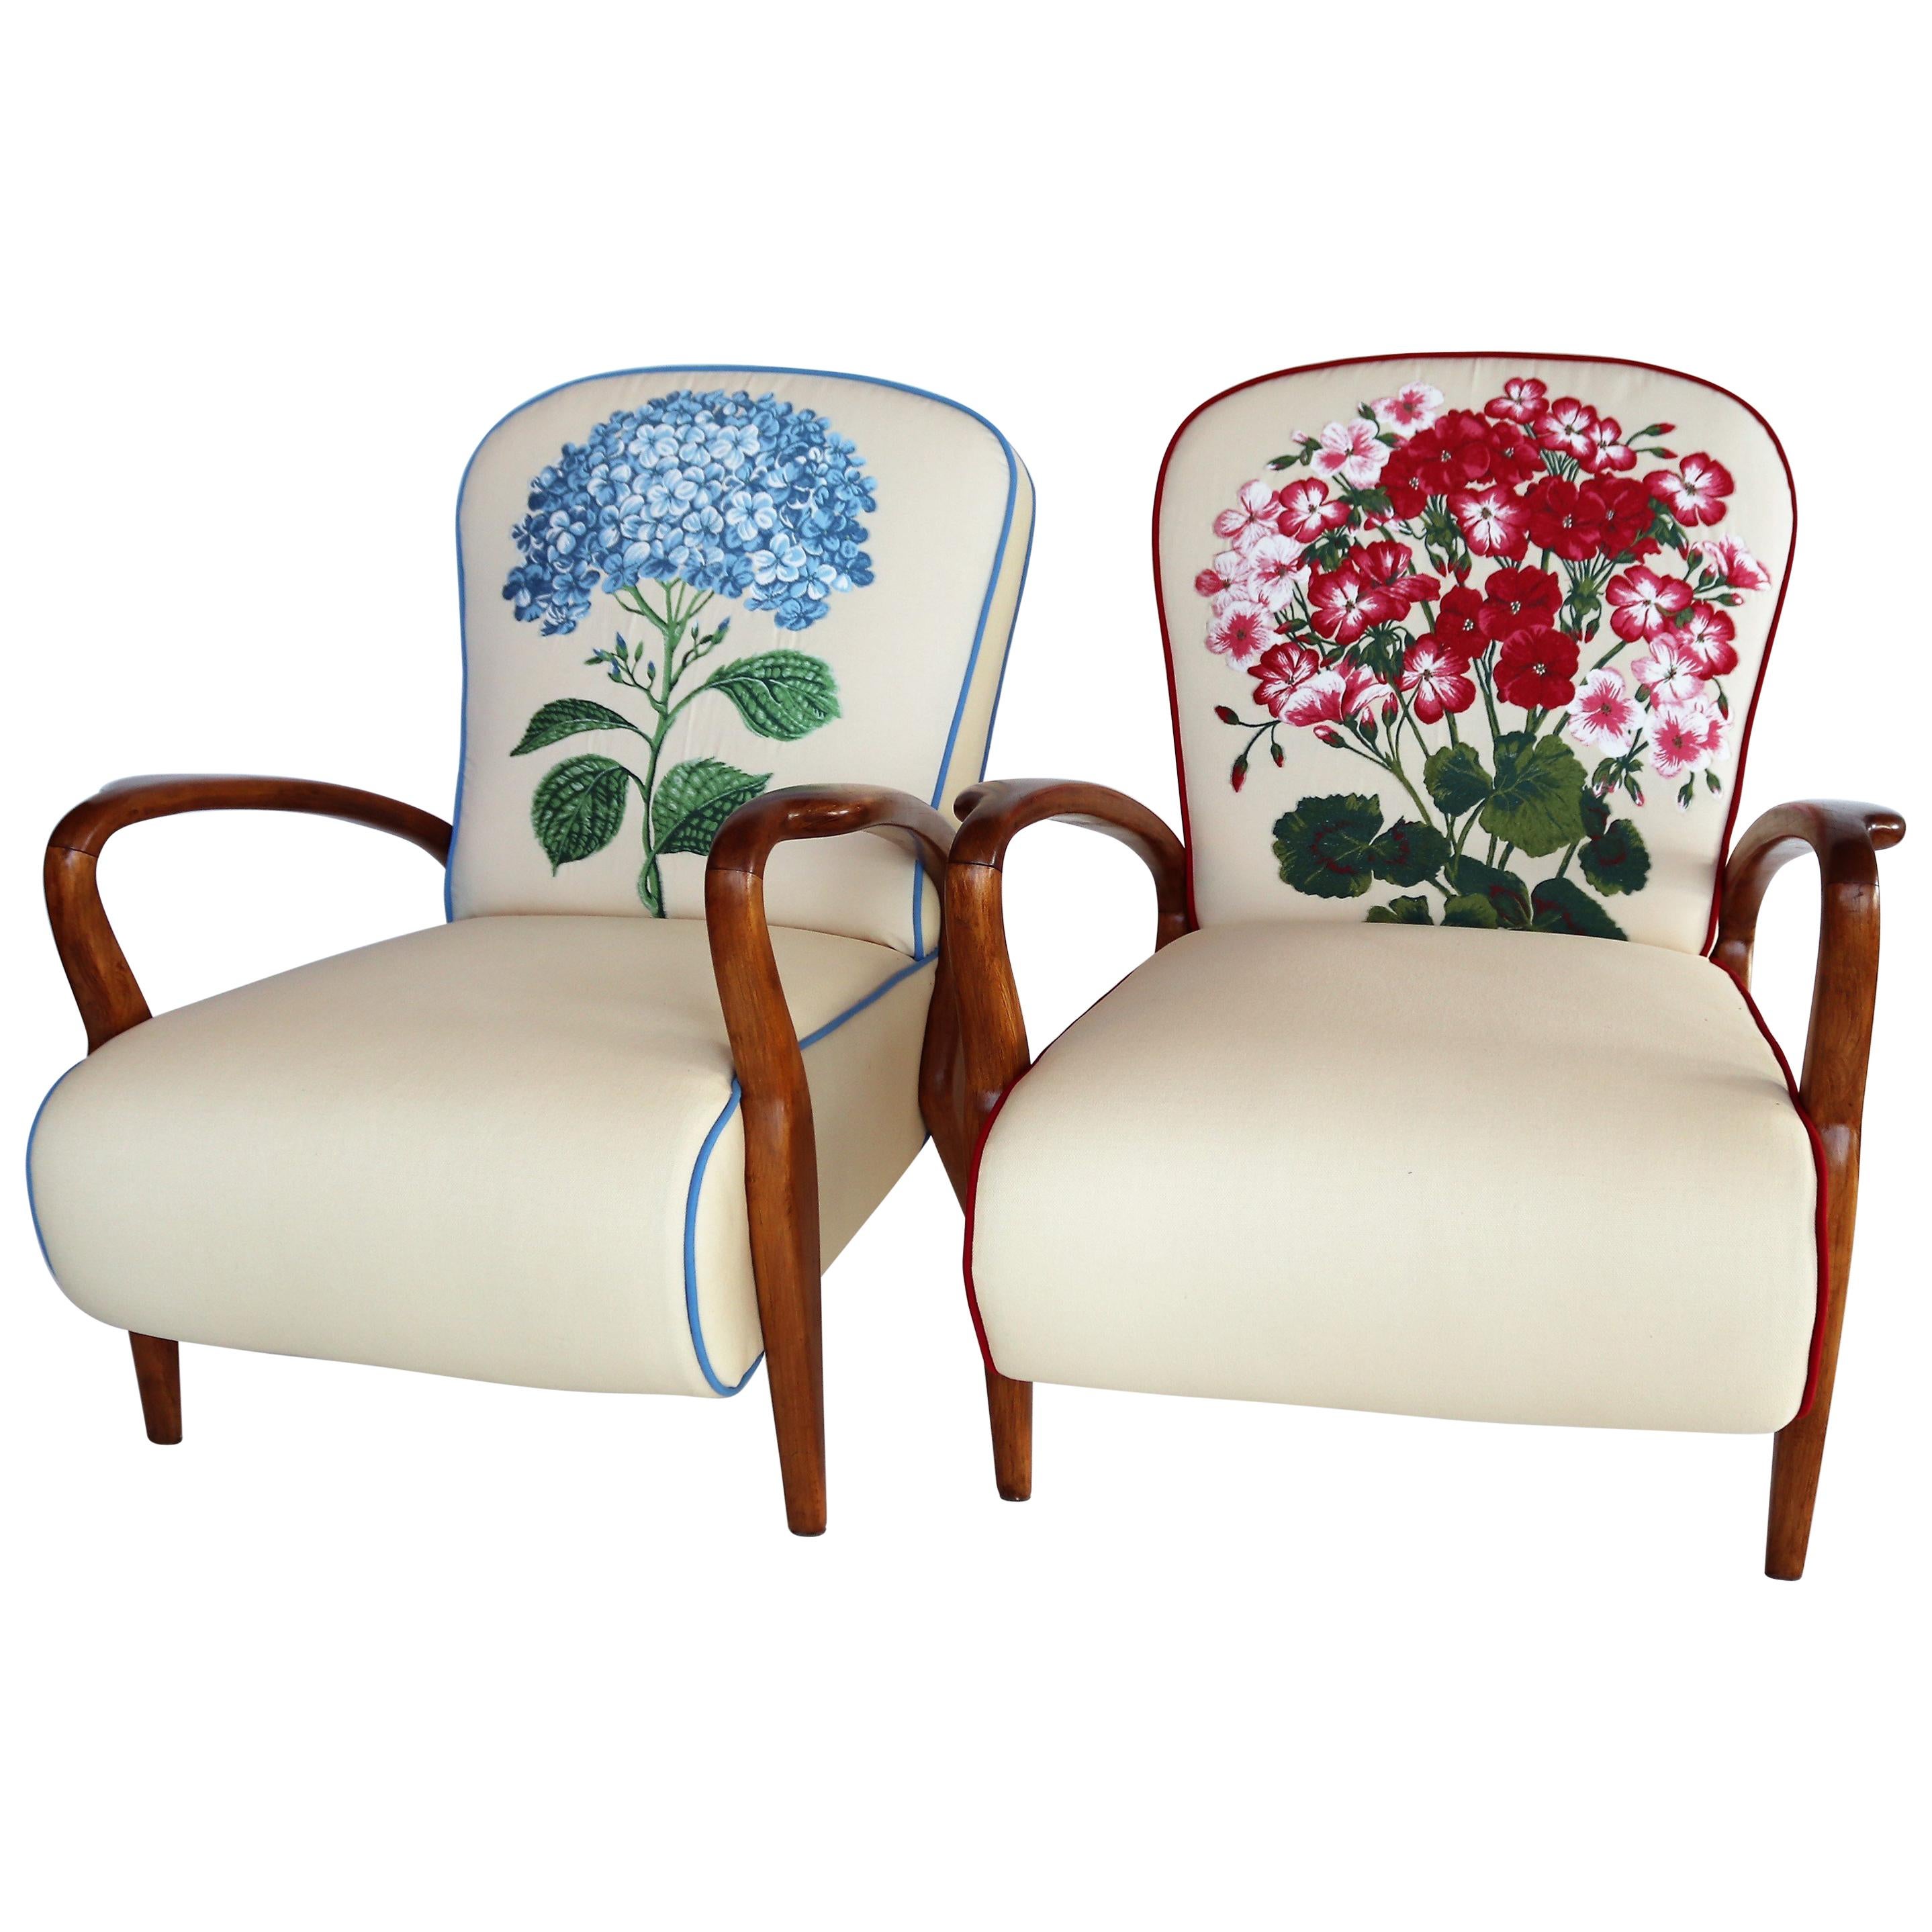 Italian Midcentury Armchairs in Oakwood and Tapestry Fabric, 1950s